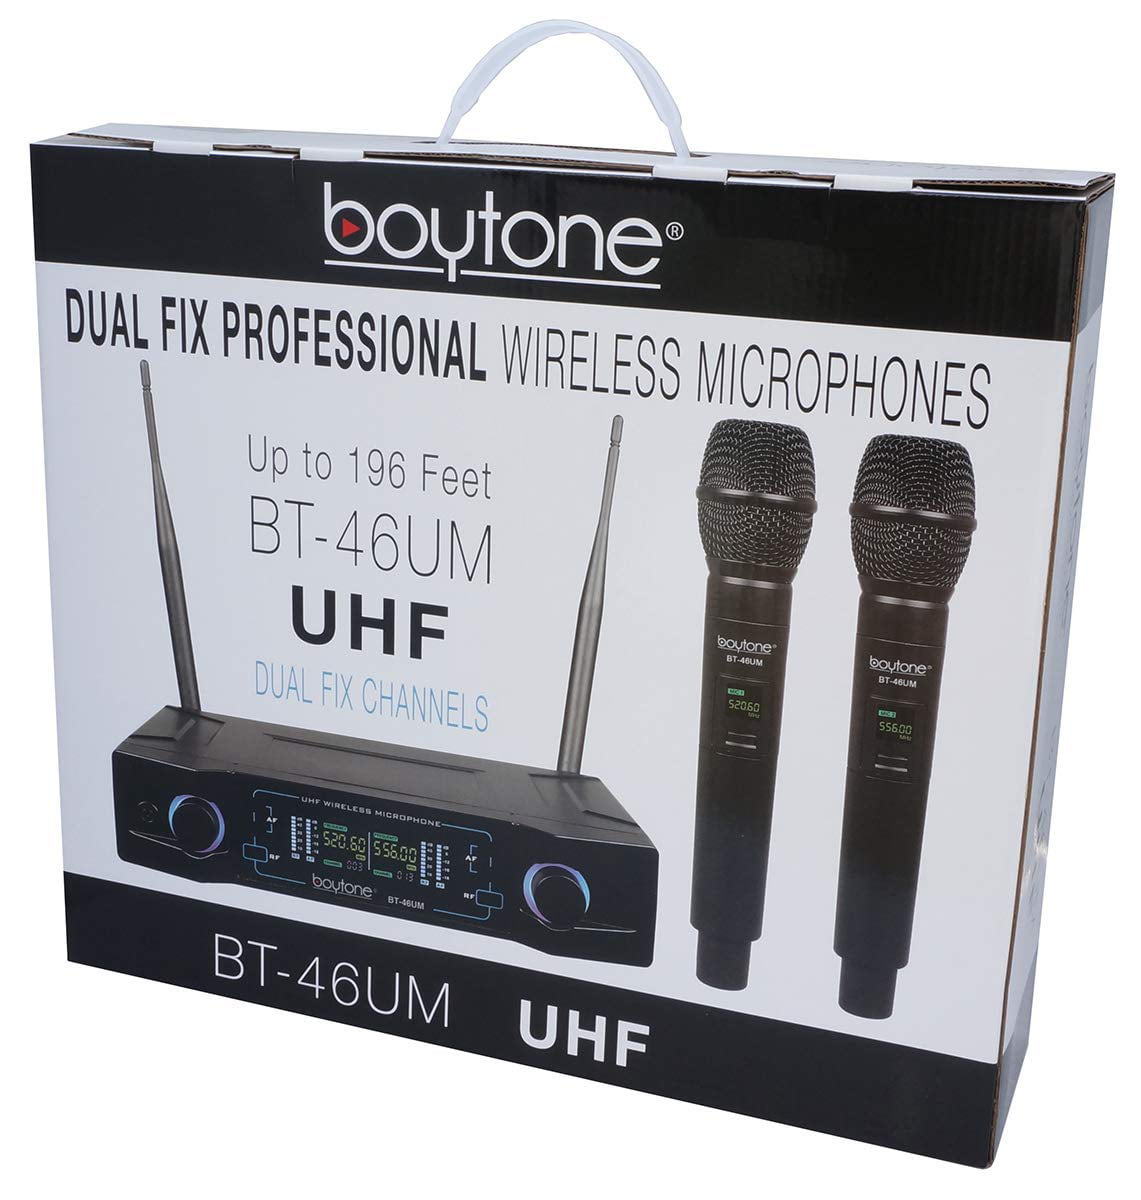 2 Handheld Dynamic Transmitter Mics Boytone BT-46UM UHF Digital Channel Wireless Microphone System Church Aluminum Carrying Cases for Party Dual Fixed Frequency Wireless Mic Receiver 110/220V